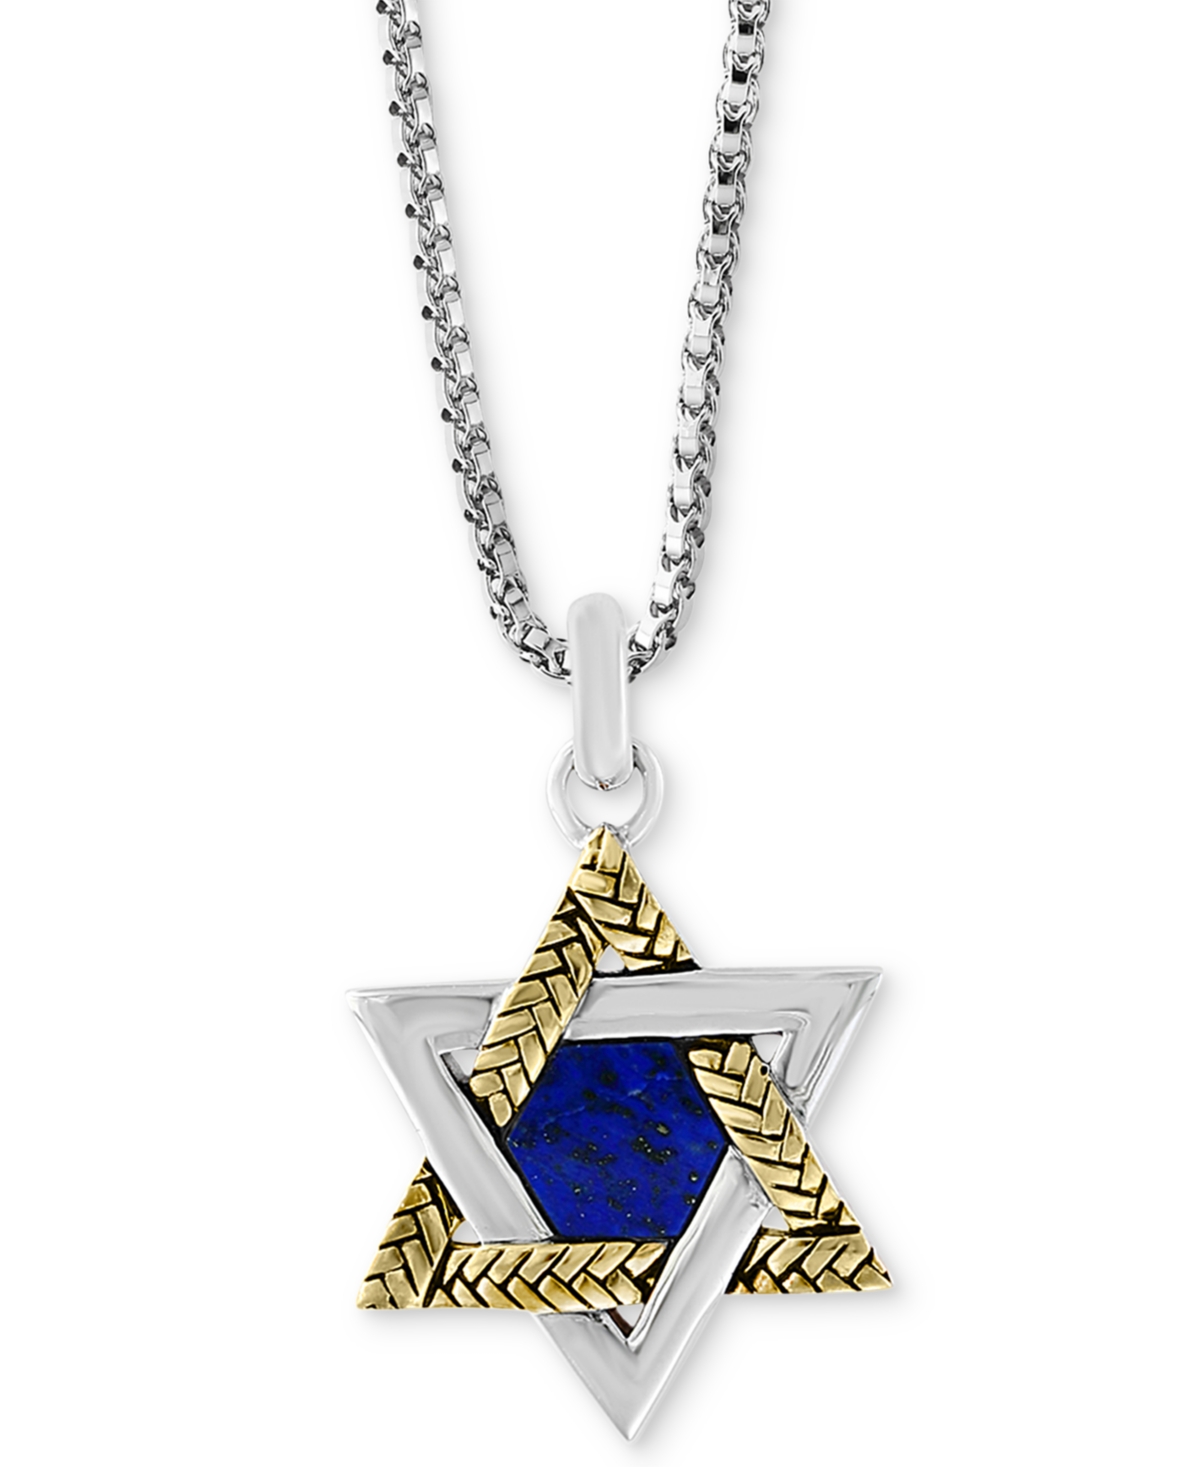 Effy Men's Lapis Lazuli (8-1/2 x 7-1/2mm) Star of David 22" Pendant Necklace in Sterling Silver & 18k Gold-Plate - Two-Tone